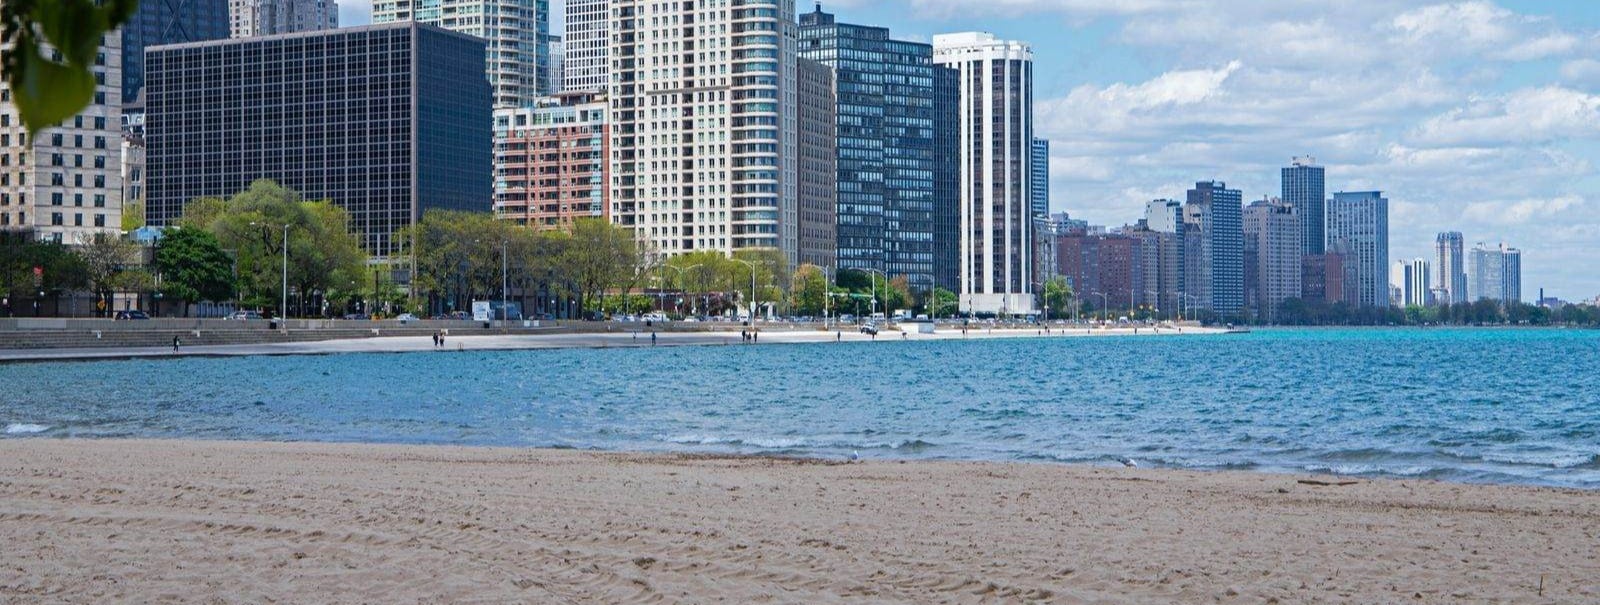 ohio street beach with chicago in the background-1